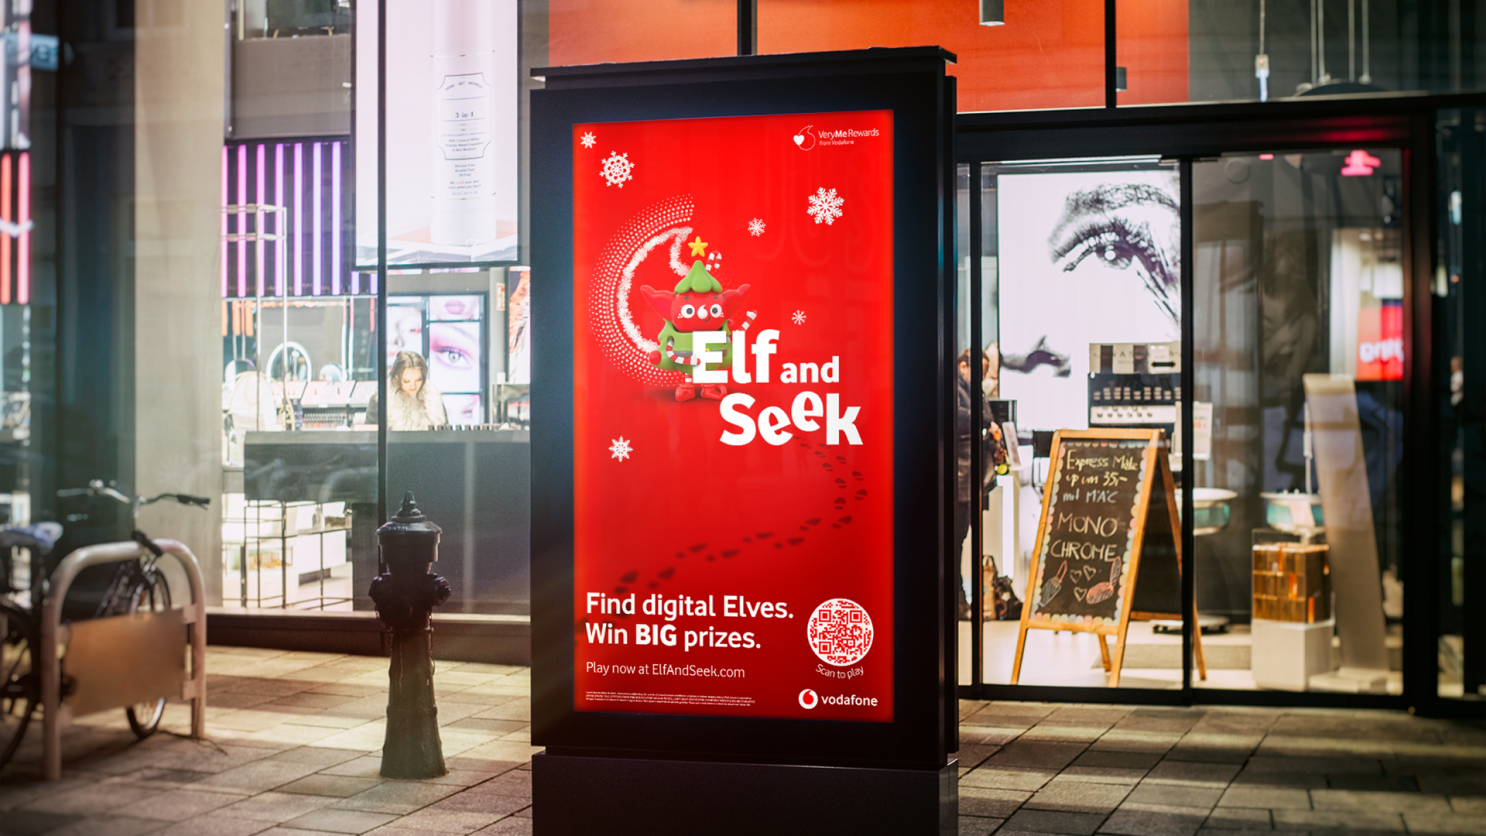 Vodafone Elf and Seek Poster Ad